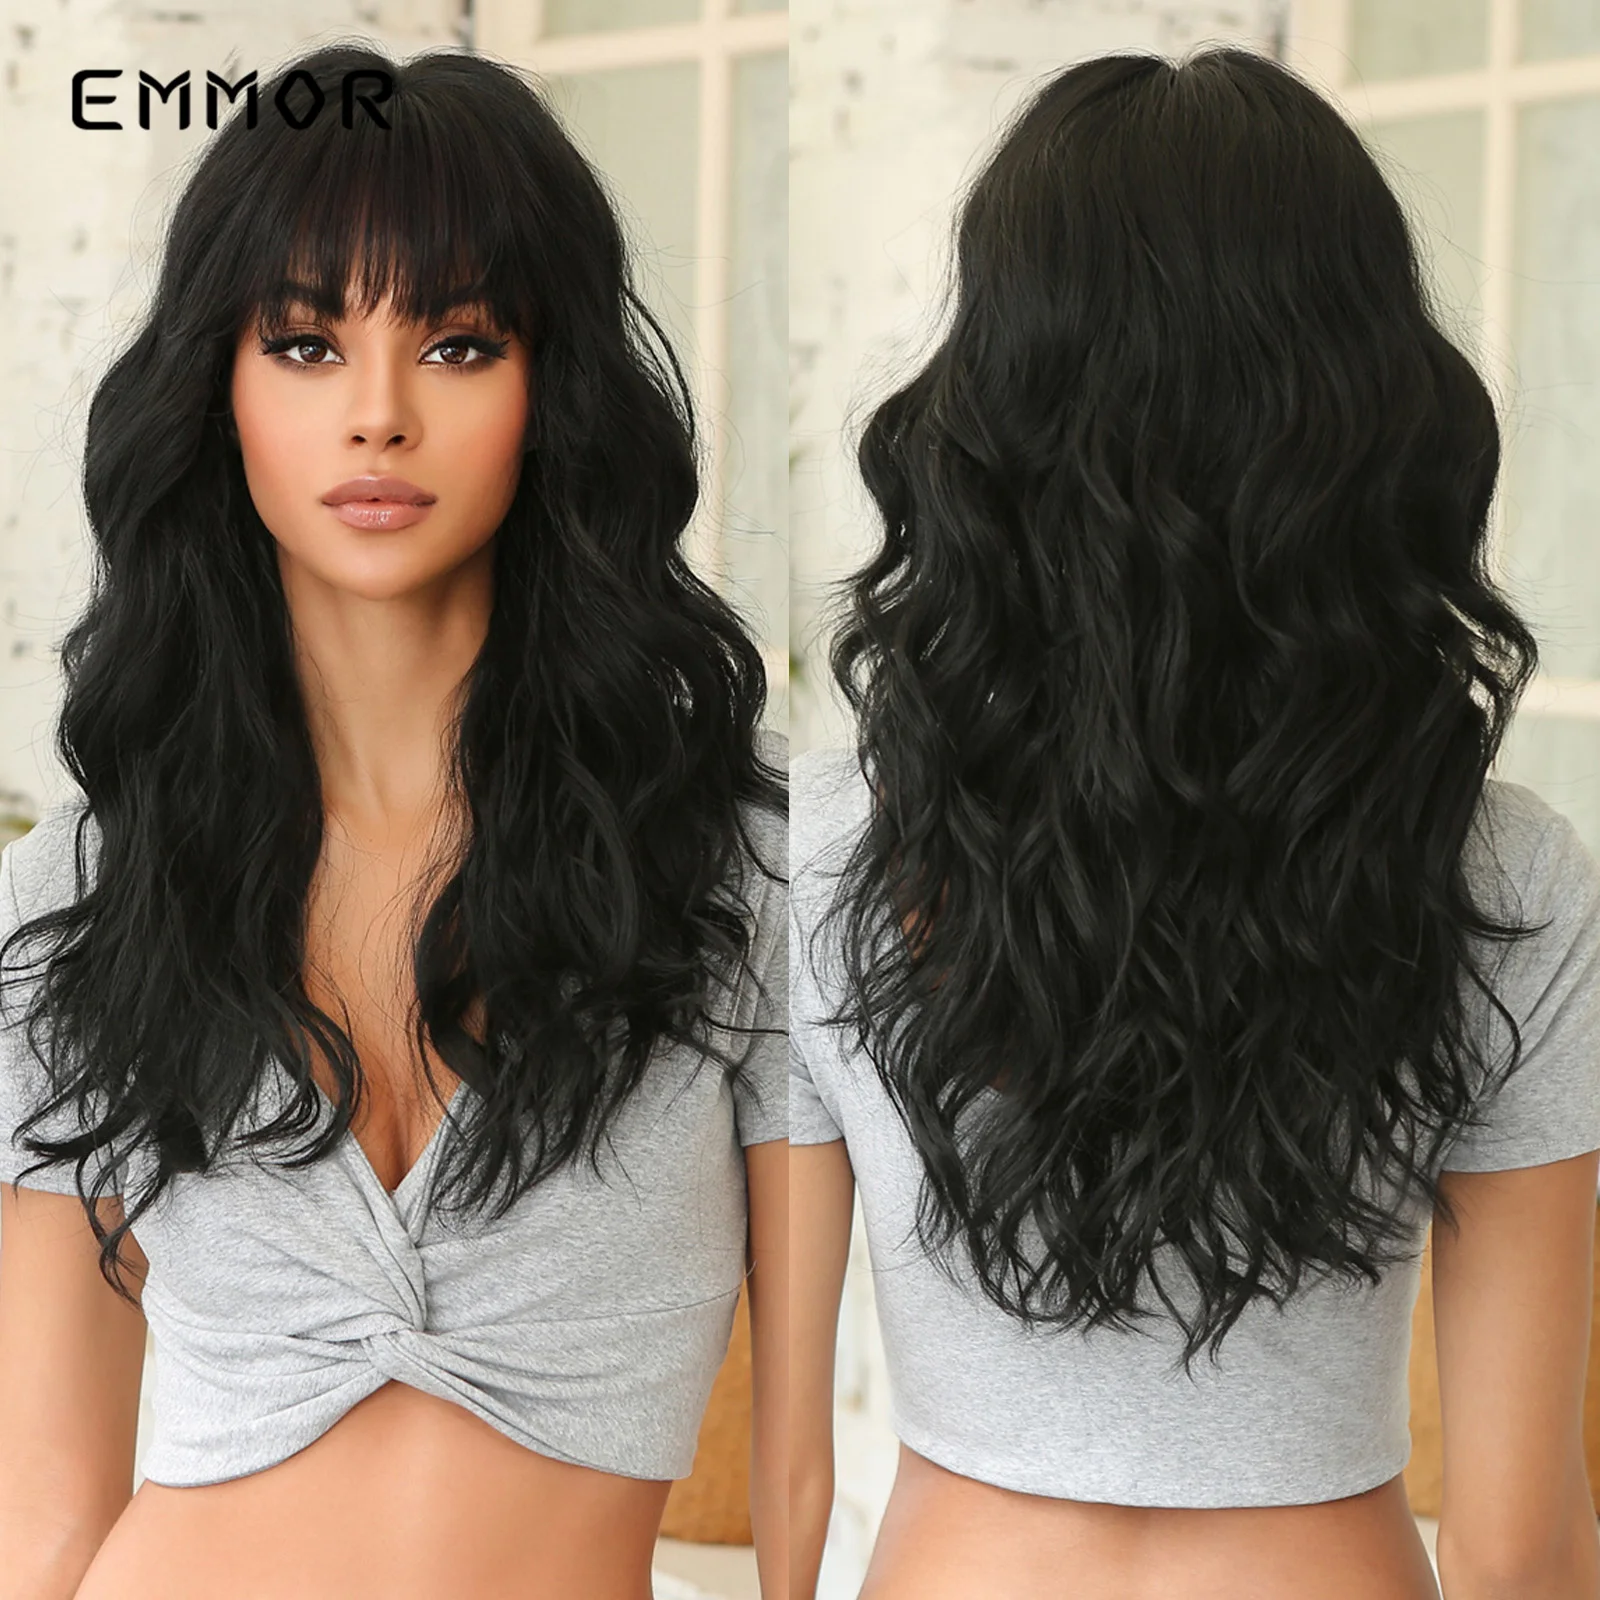 Emmor Black Long Wave Wigs with Bangs for Women High Quality Synthetic Wig - £23.32 GBP